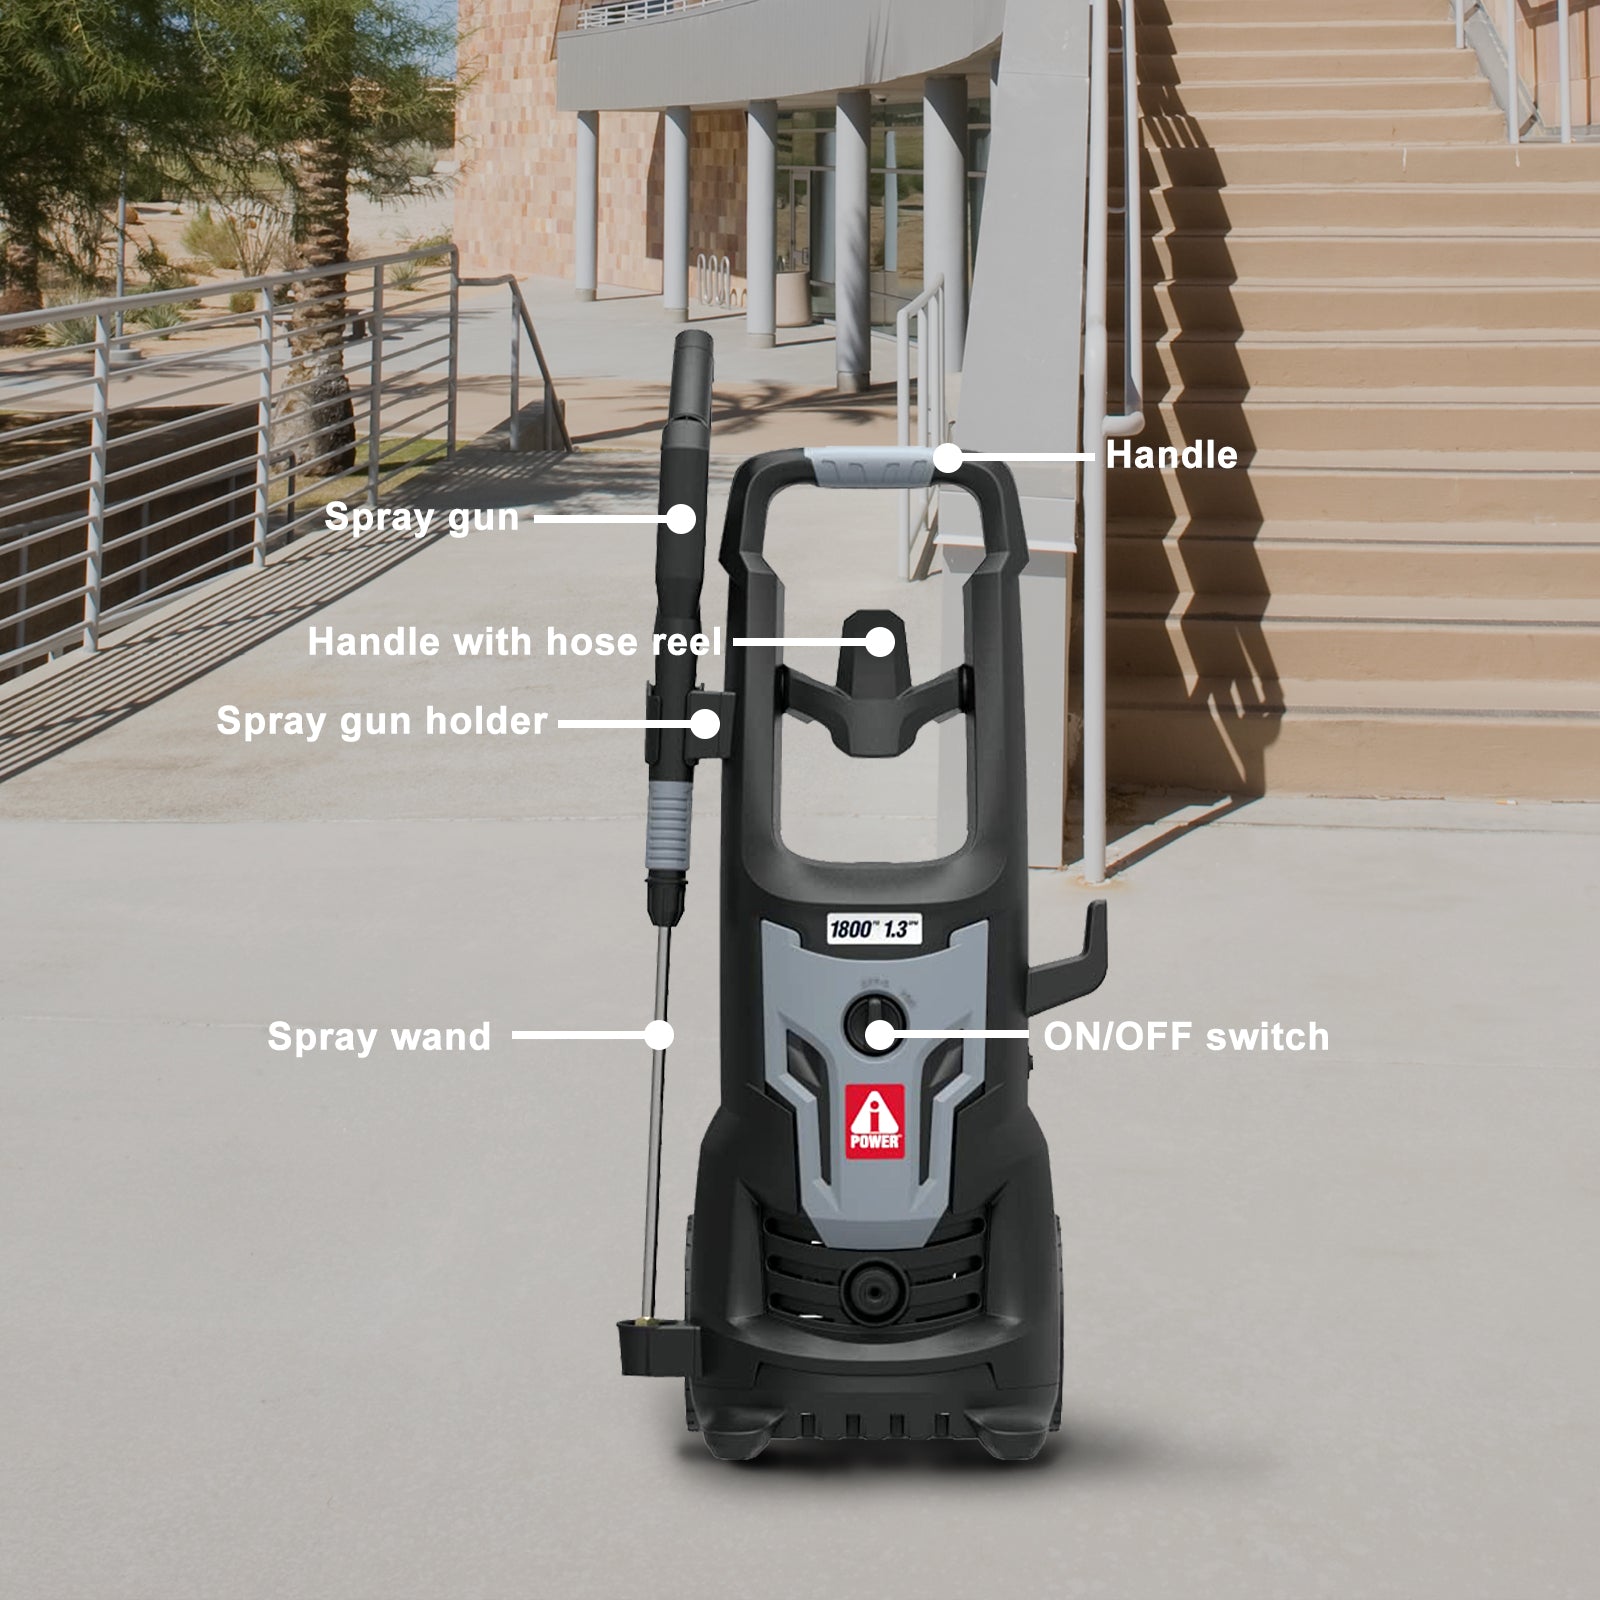 PWE1802 - A-iPower Electric Pressure Washer - Features.jpg__PID:9de6f275-3e40-4745-bc16-6820e25e1517